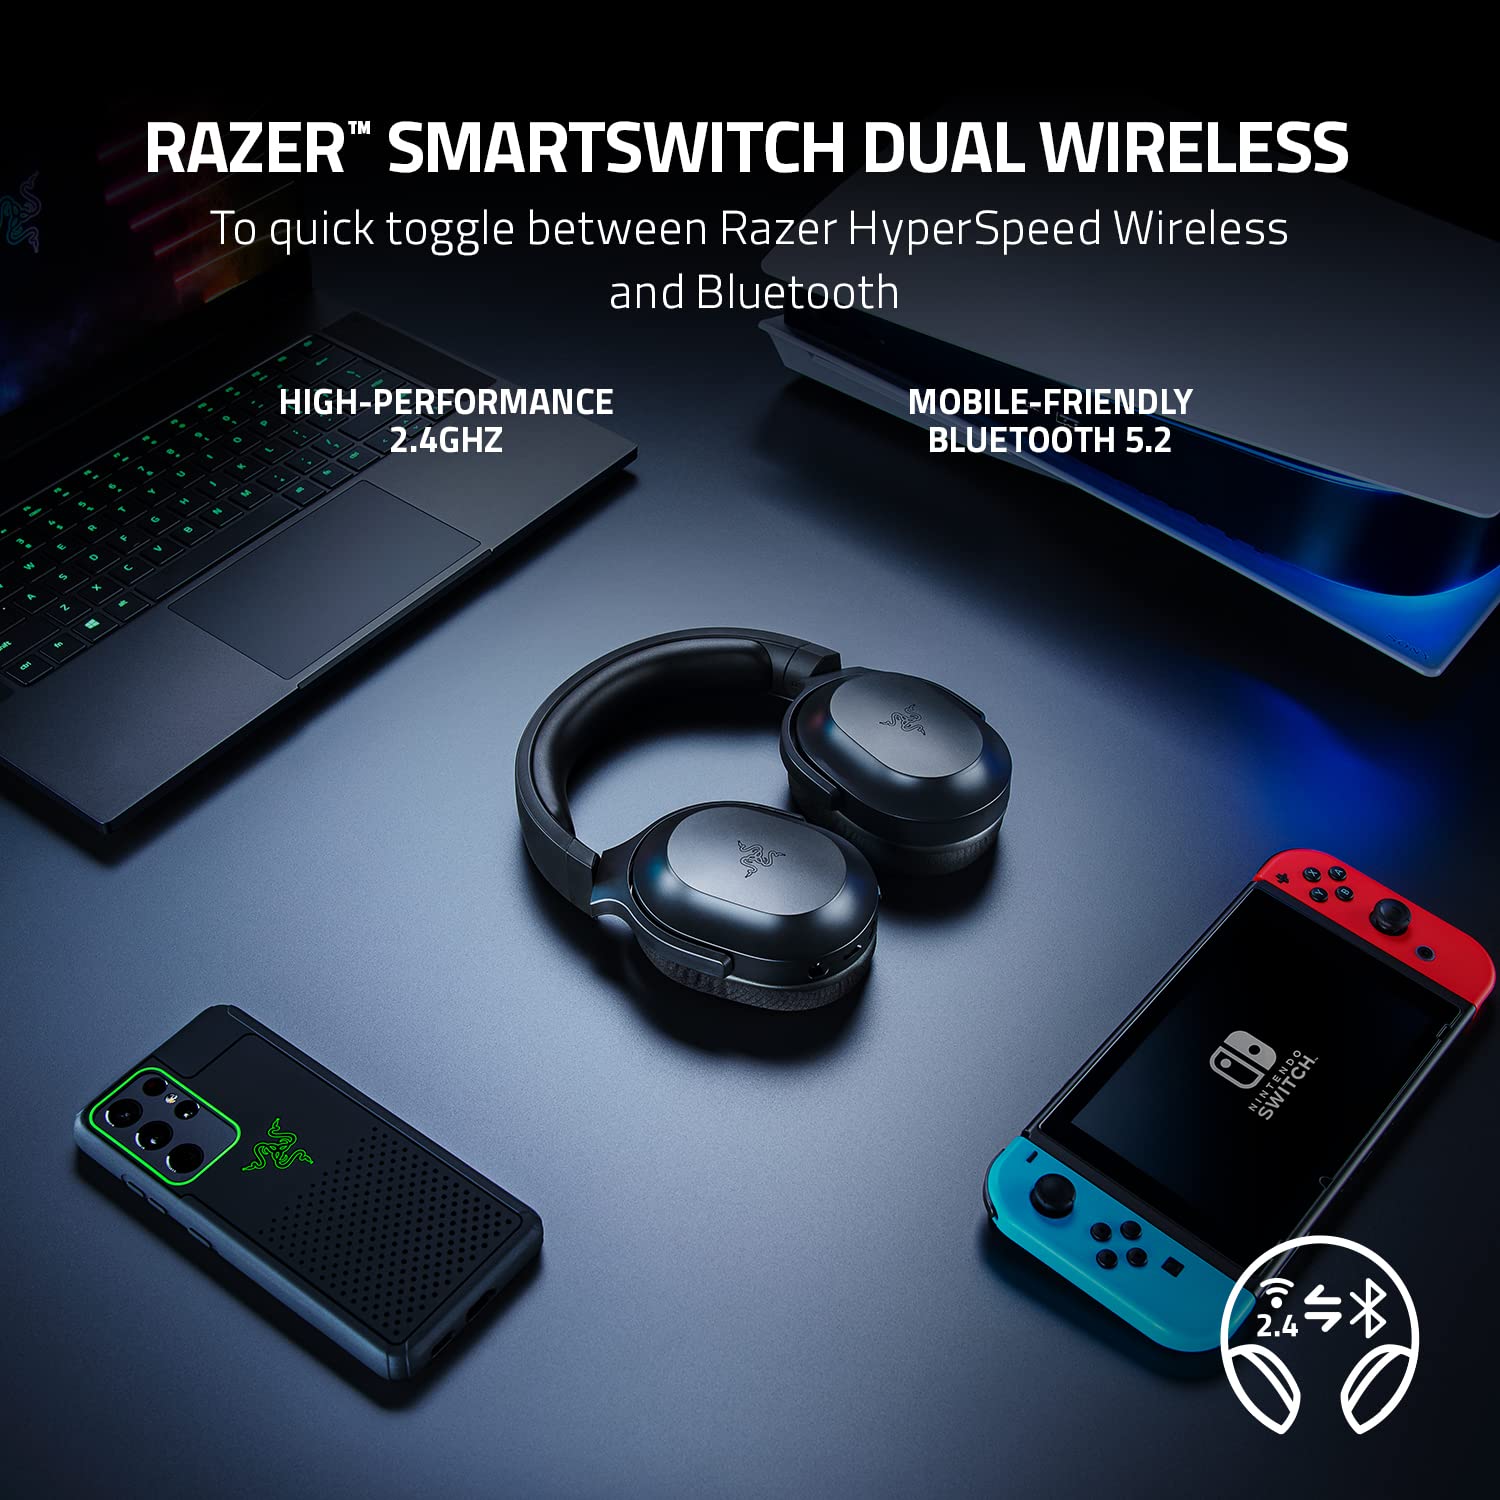 Razer Barracuda X Wireless Gaming & Mobile Headset (PC, Playstation, Switch, Android, iOS): 2.4GHz Wireless + Bluetooth - Lightweight - 40mm Drivers - Detachable Mic - 50 Hr Battery - Black